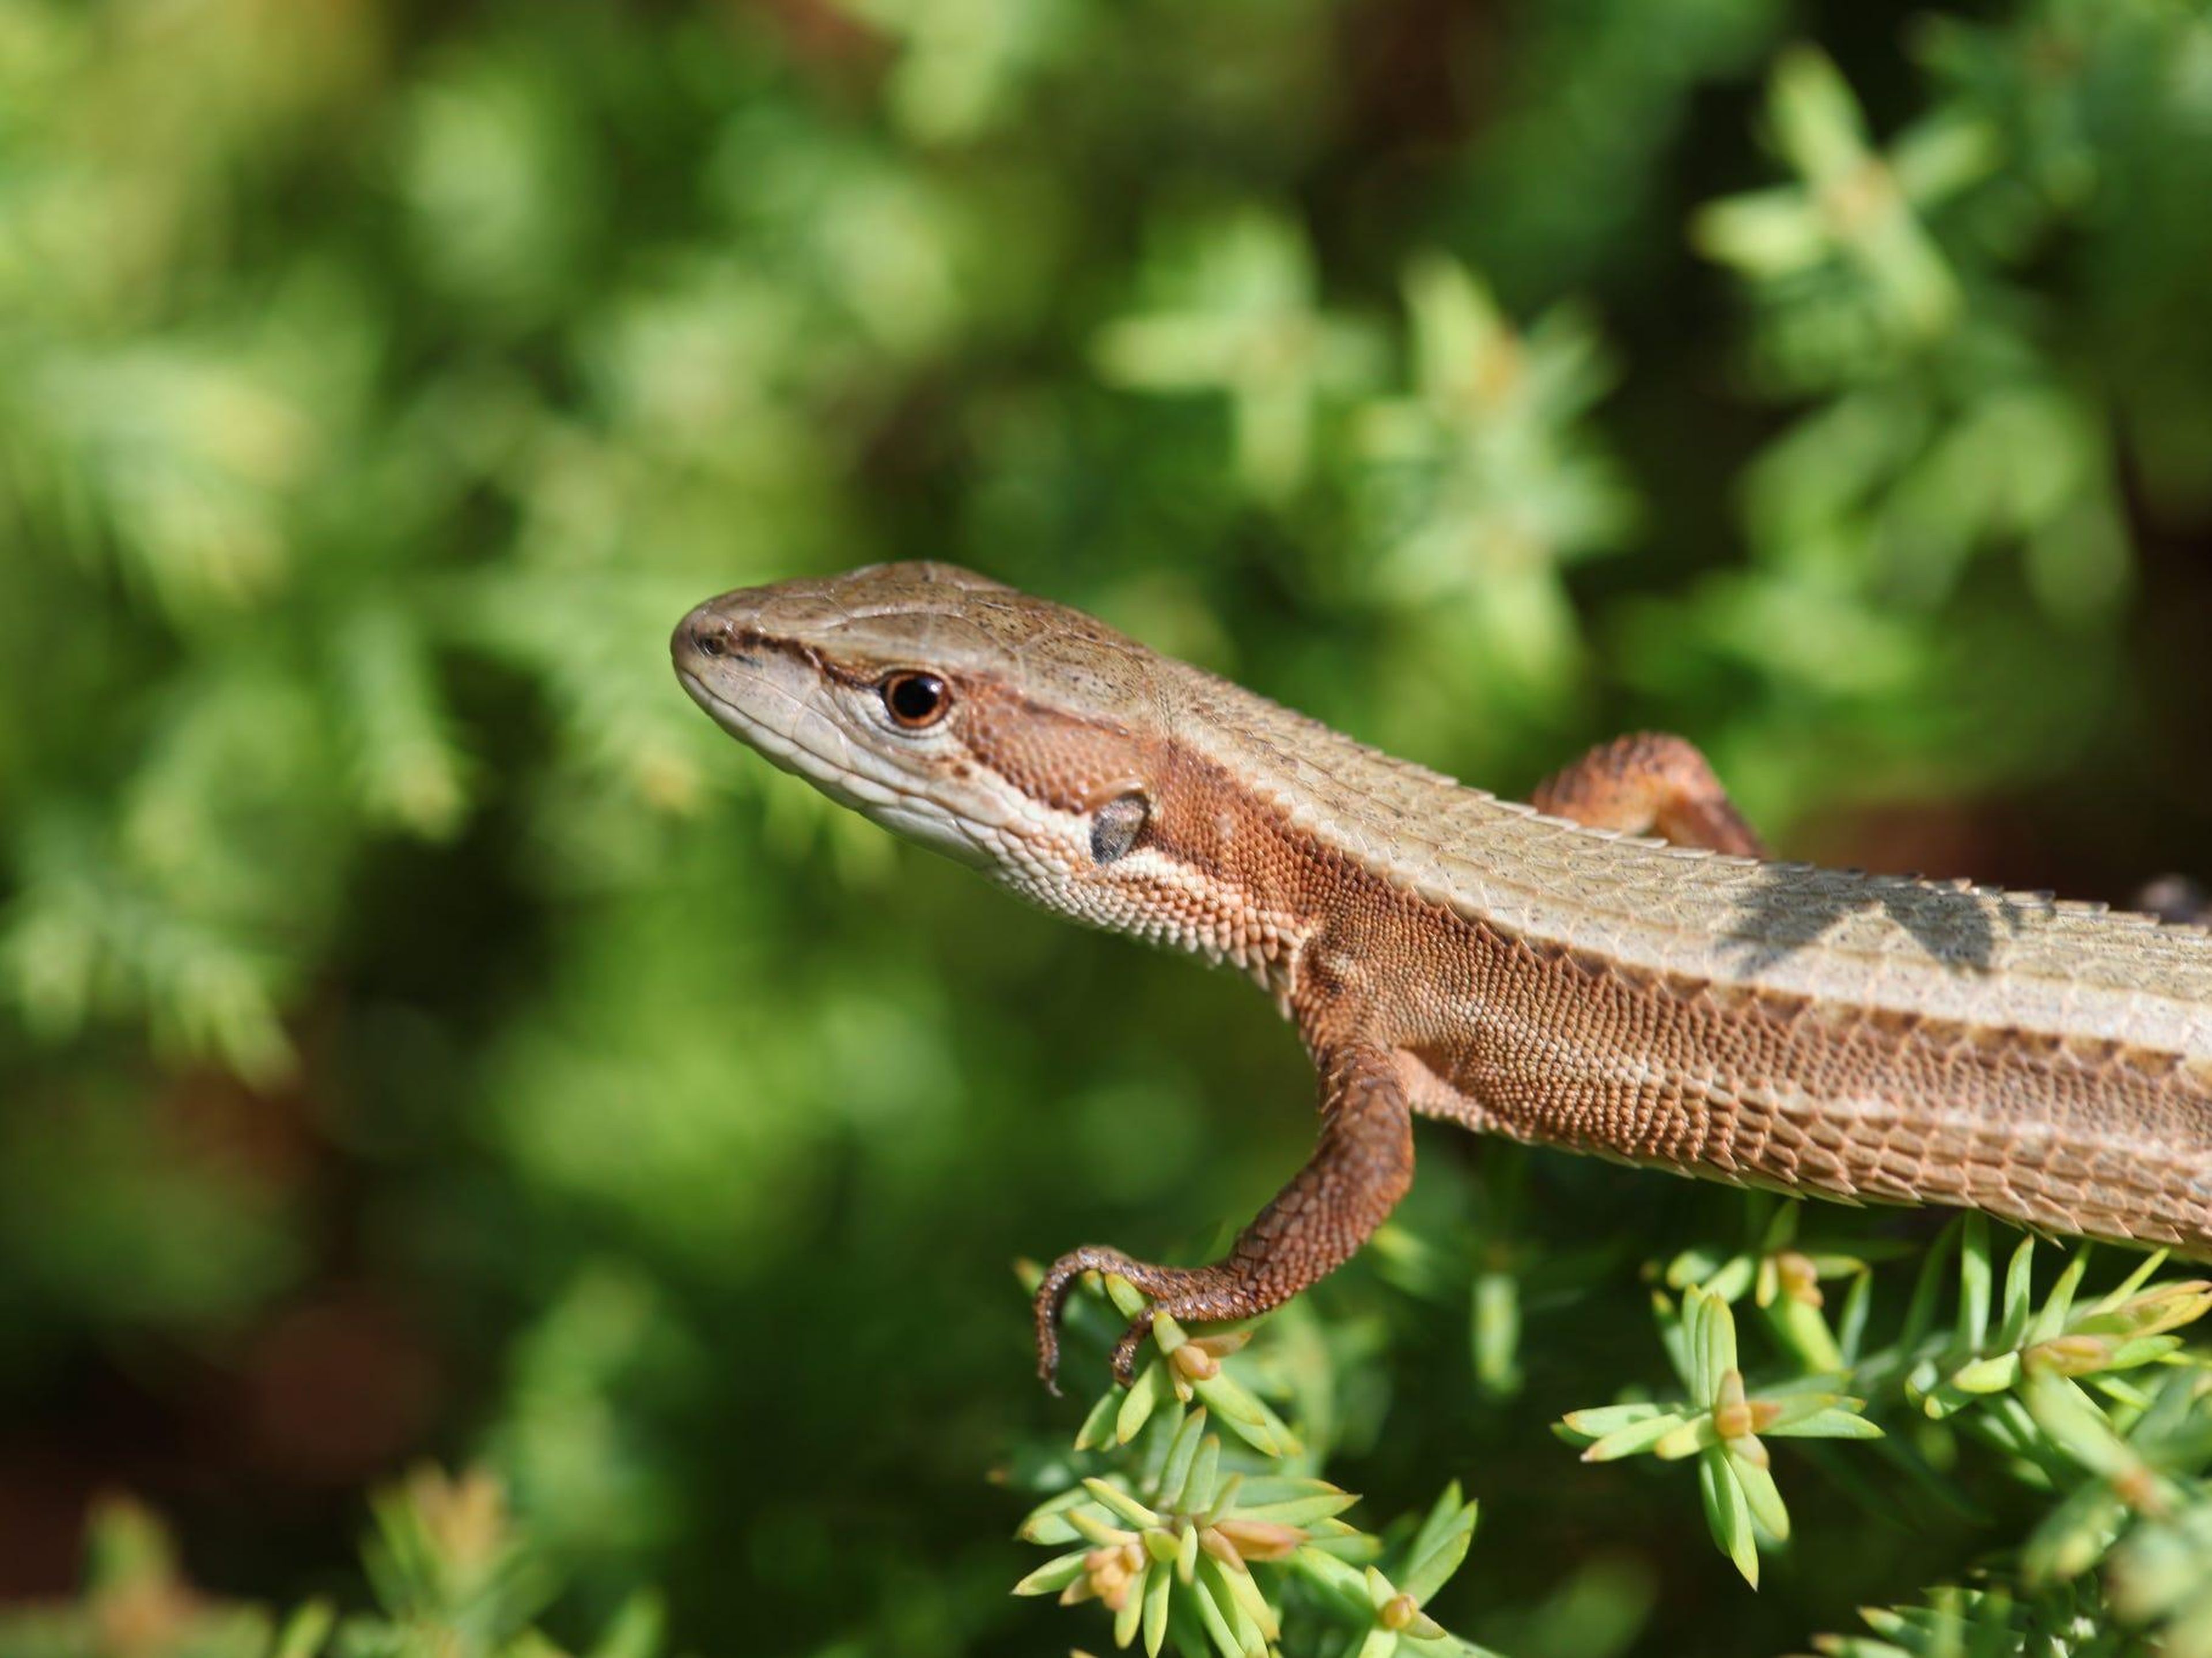 "Imagine that the world is hotter and that lizards adapt to live in temperatures very close to yours. Then their viruses adapt to higher temperatures," Arturo Casadevall, chair of molecular microbiology and immunology at the Johns